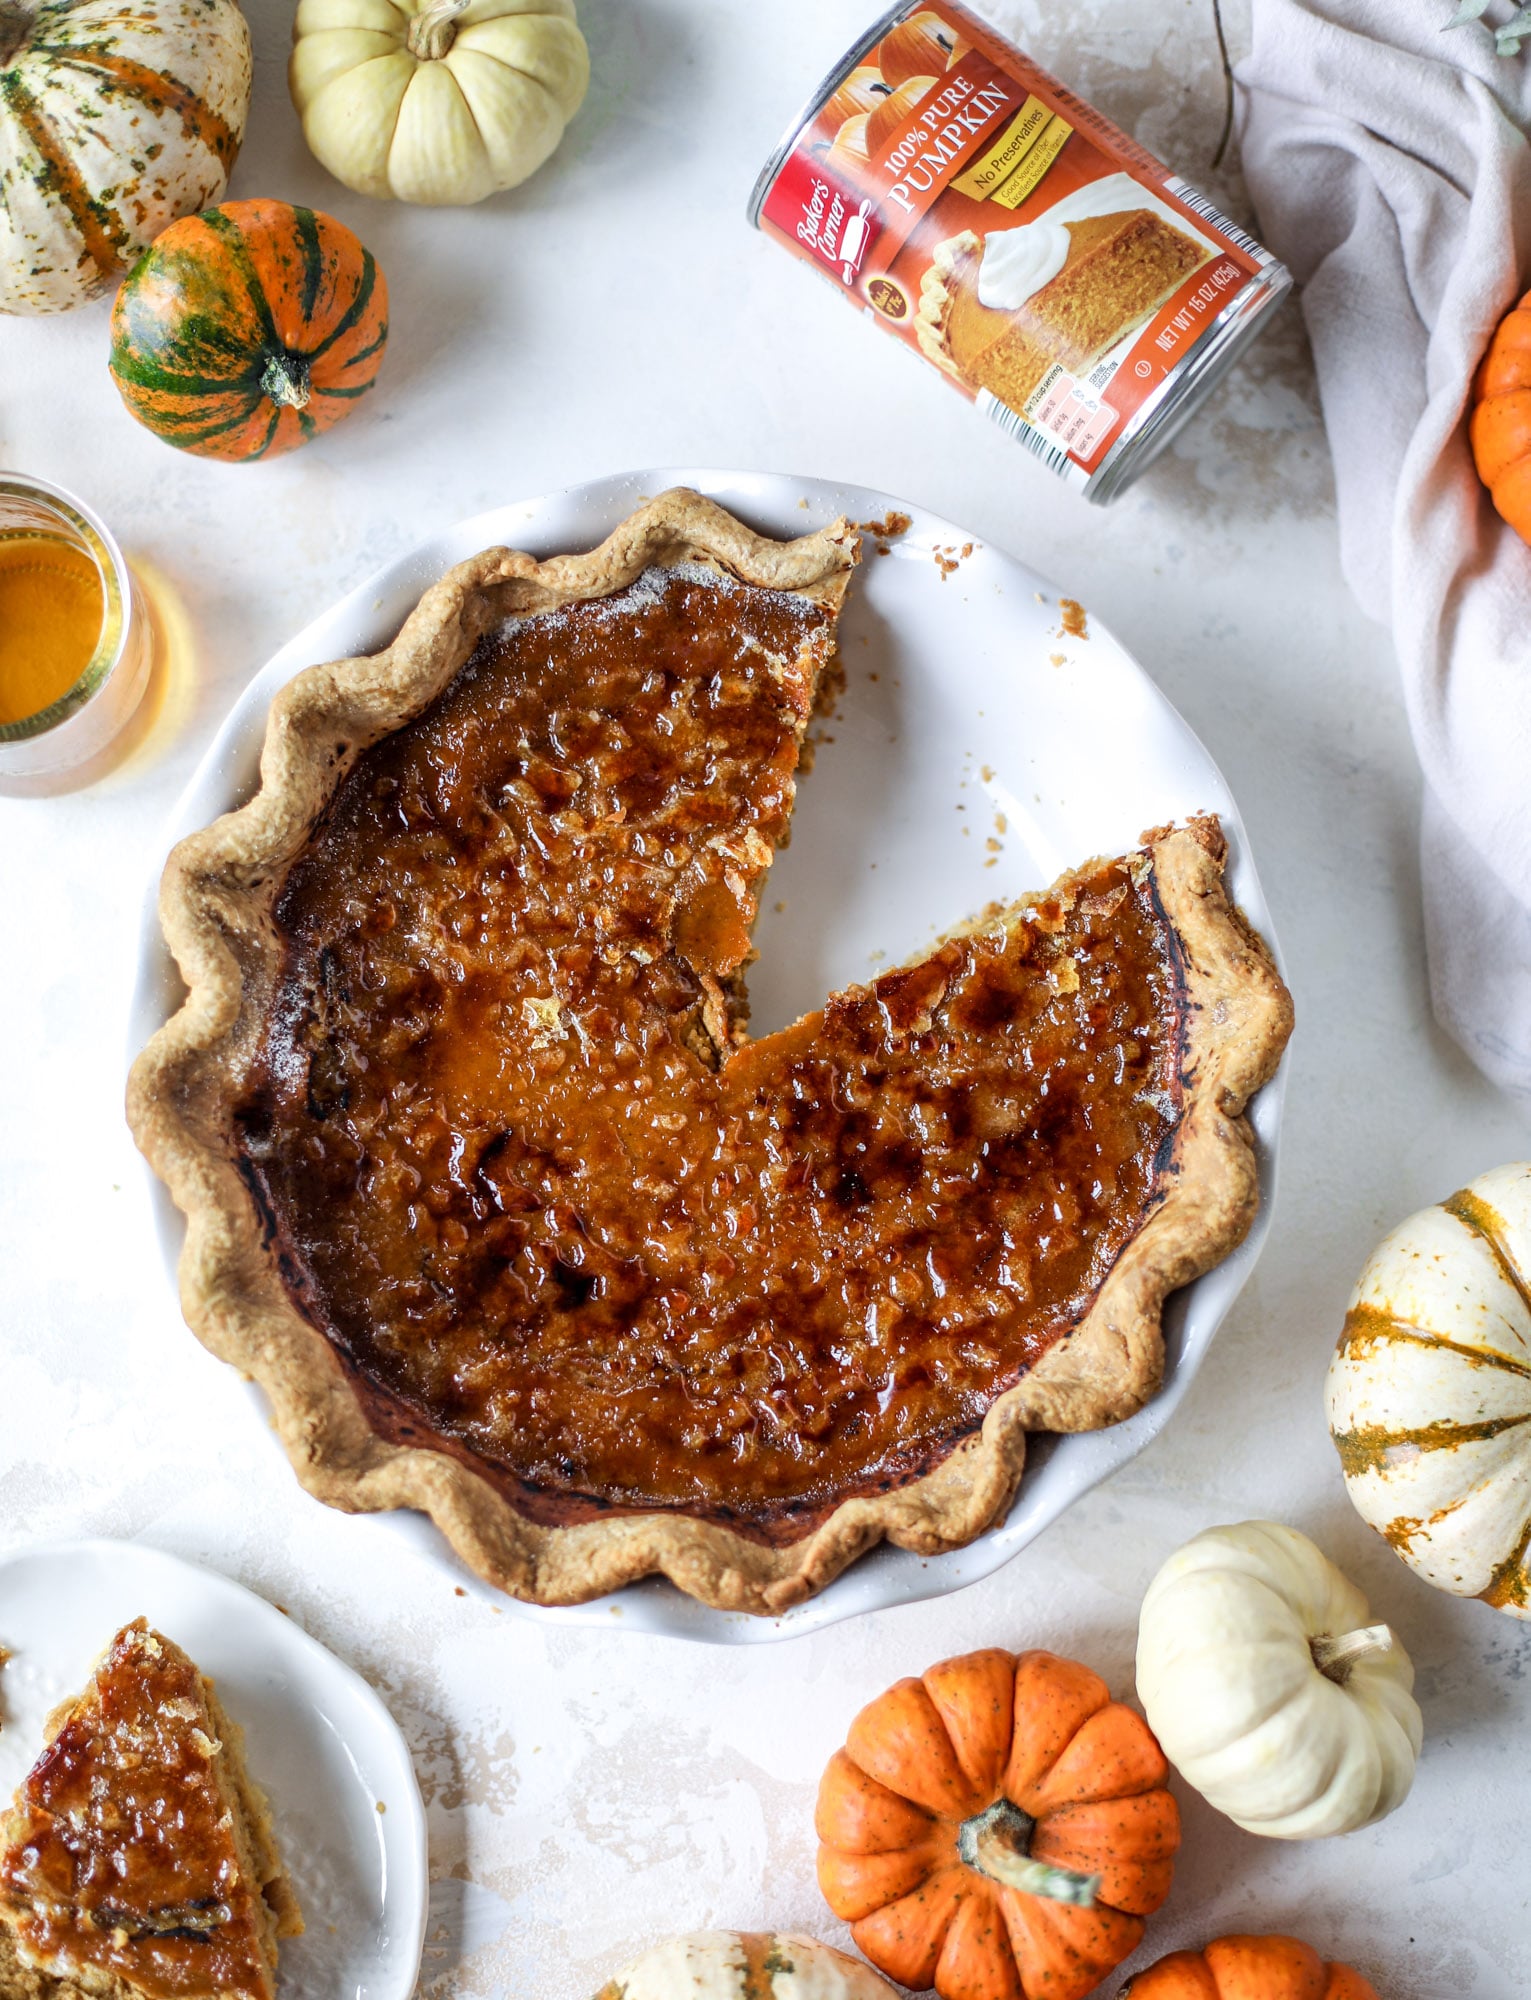 This brûlée pumpkin pie is the best of both worlds in pumpkin desserts! A delicious flaky crust, a creamy pumpkin filling and a crunchy, crispy topping - brûléed sugar right before serving. It's a whole new way to serve pumpkin pie! I howsweeteats.com #pumpkinpie #brulee